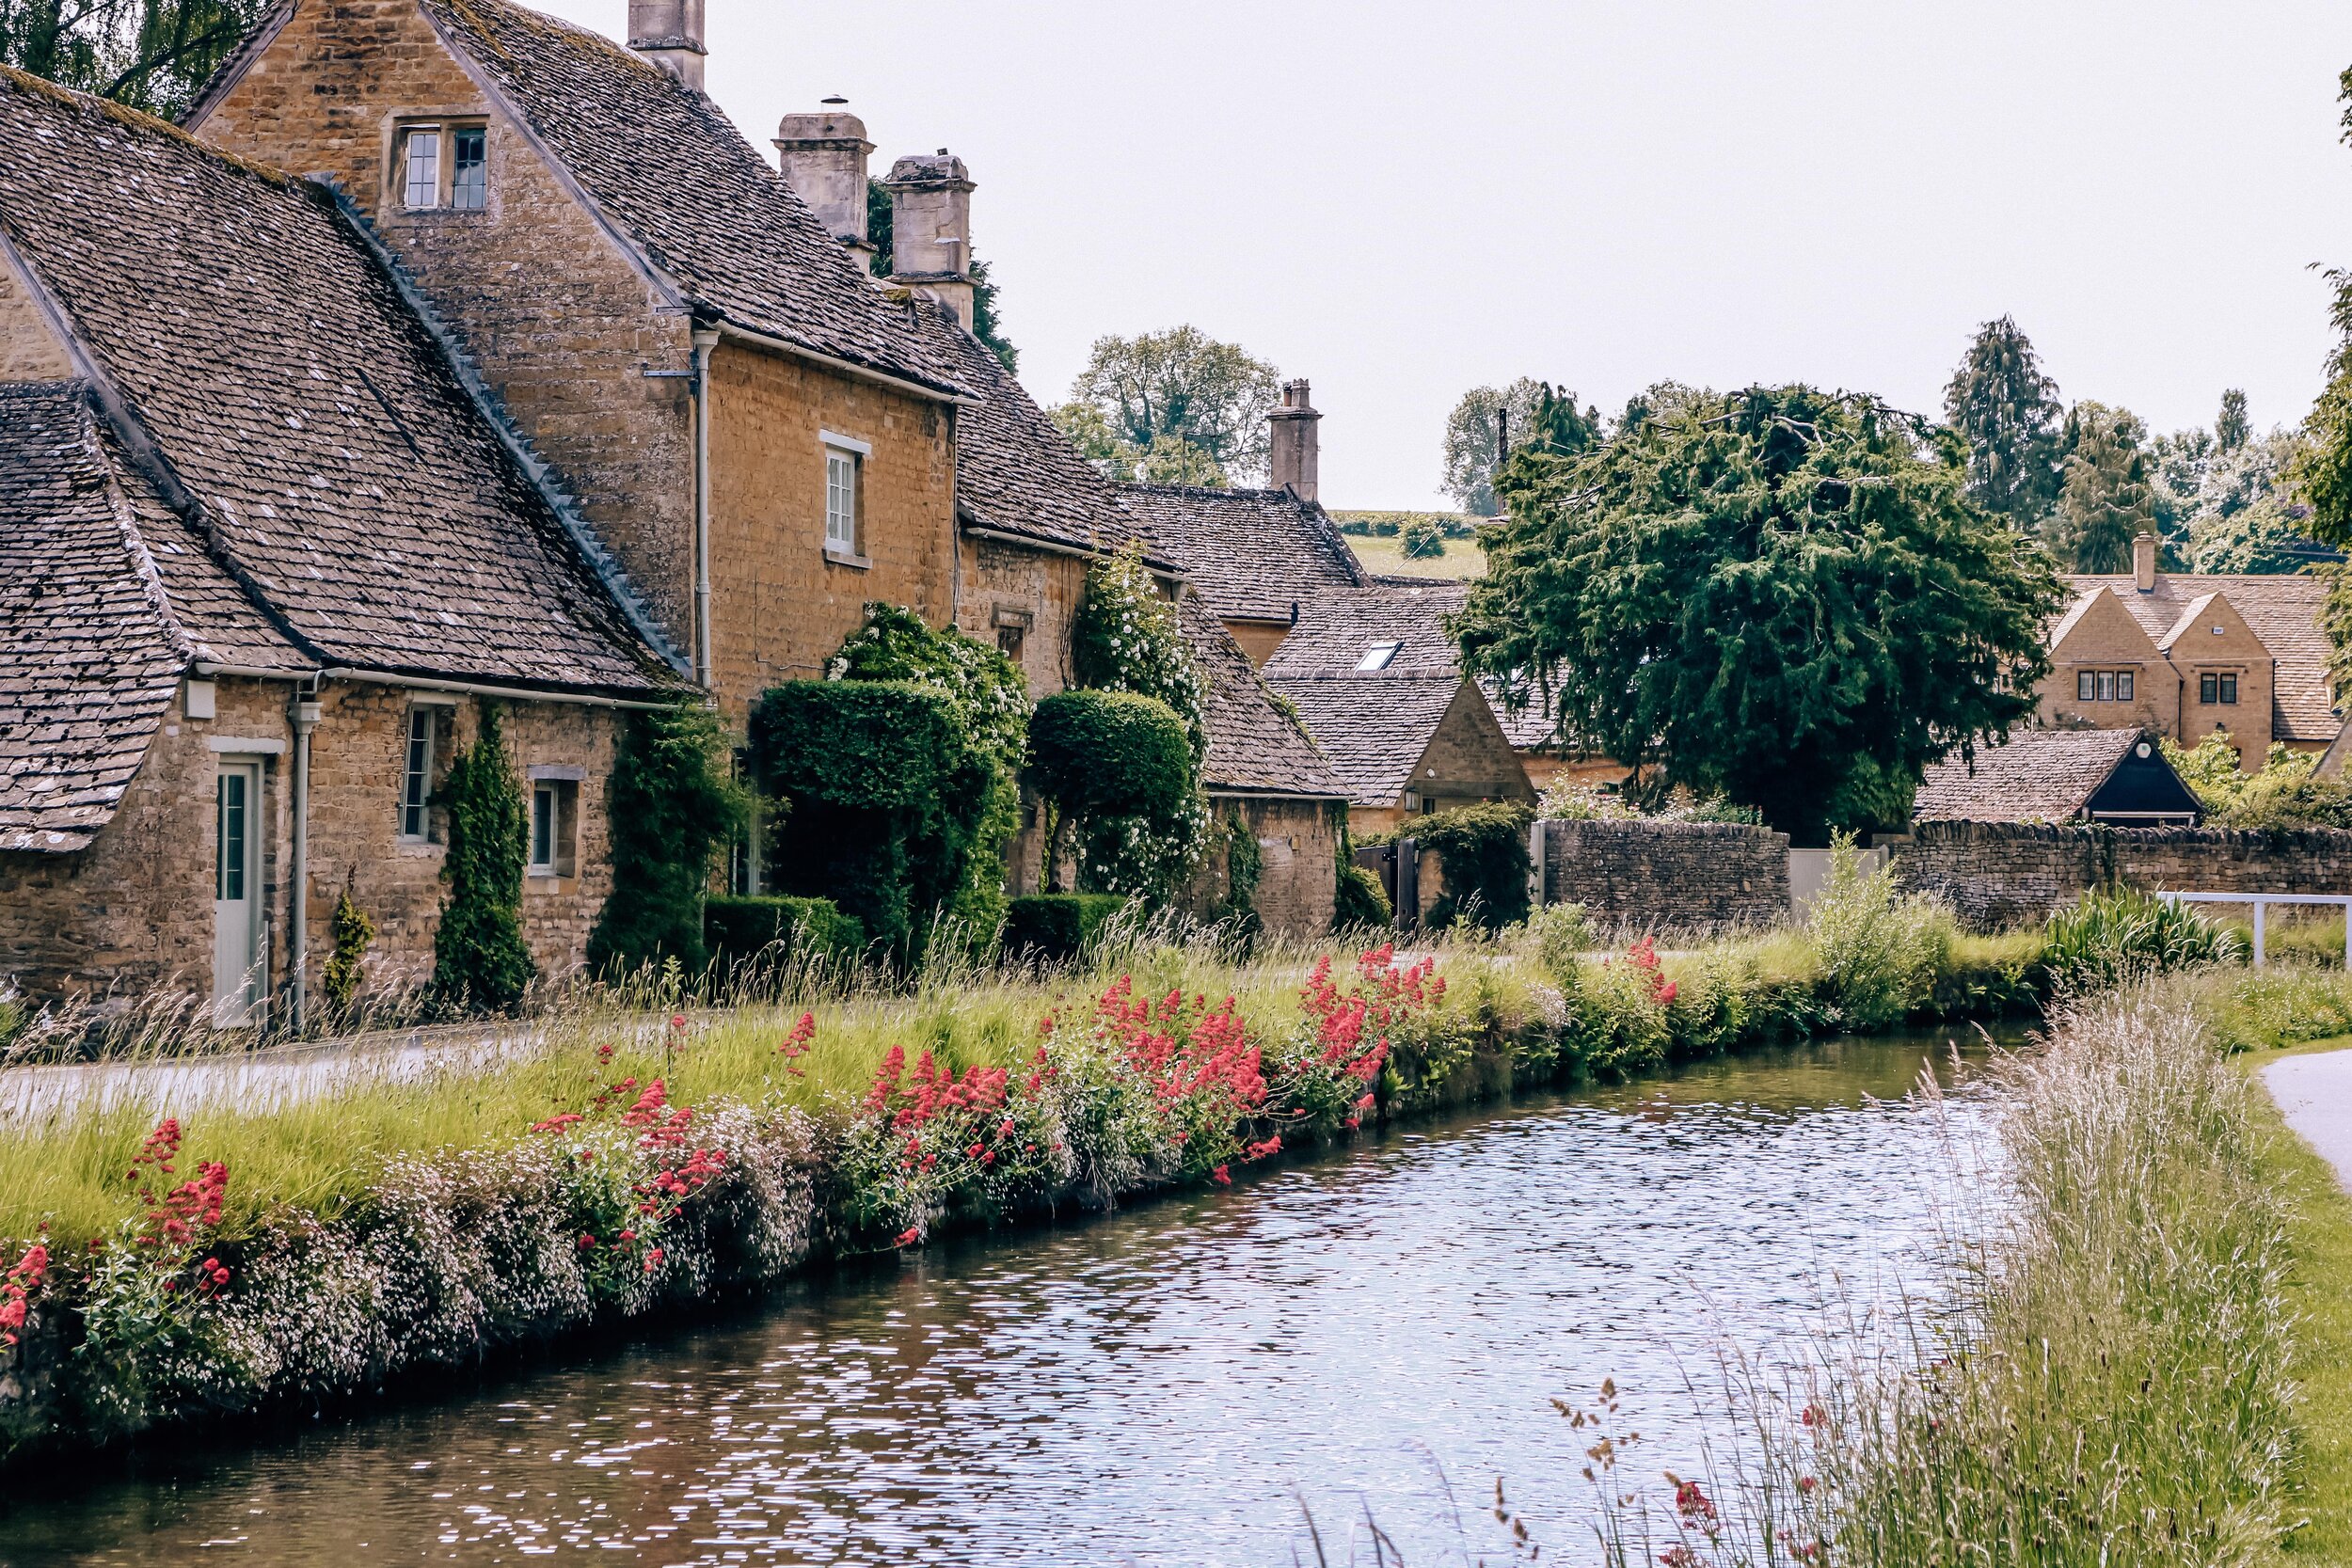 A row of sand-coloured stone houses along a path right next to a stream lined with pink flowers in the Cotswolds